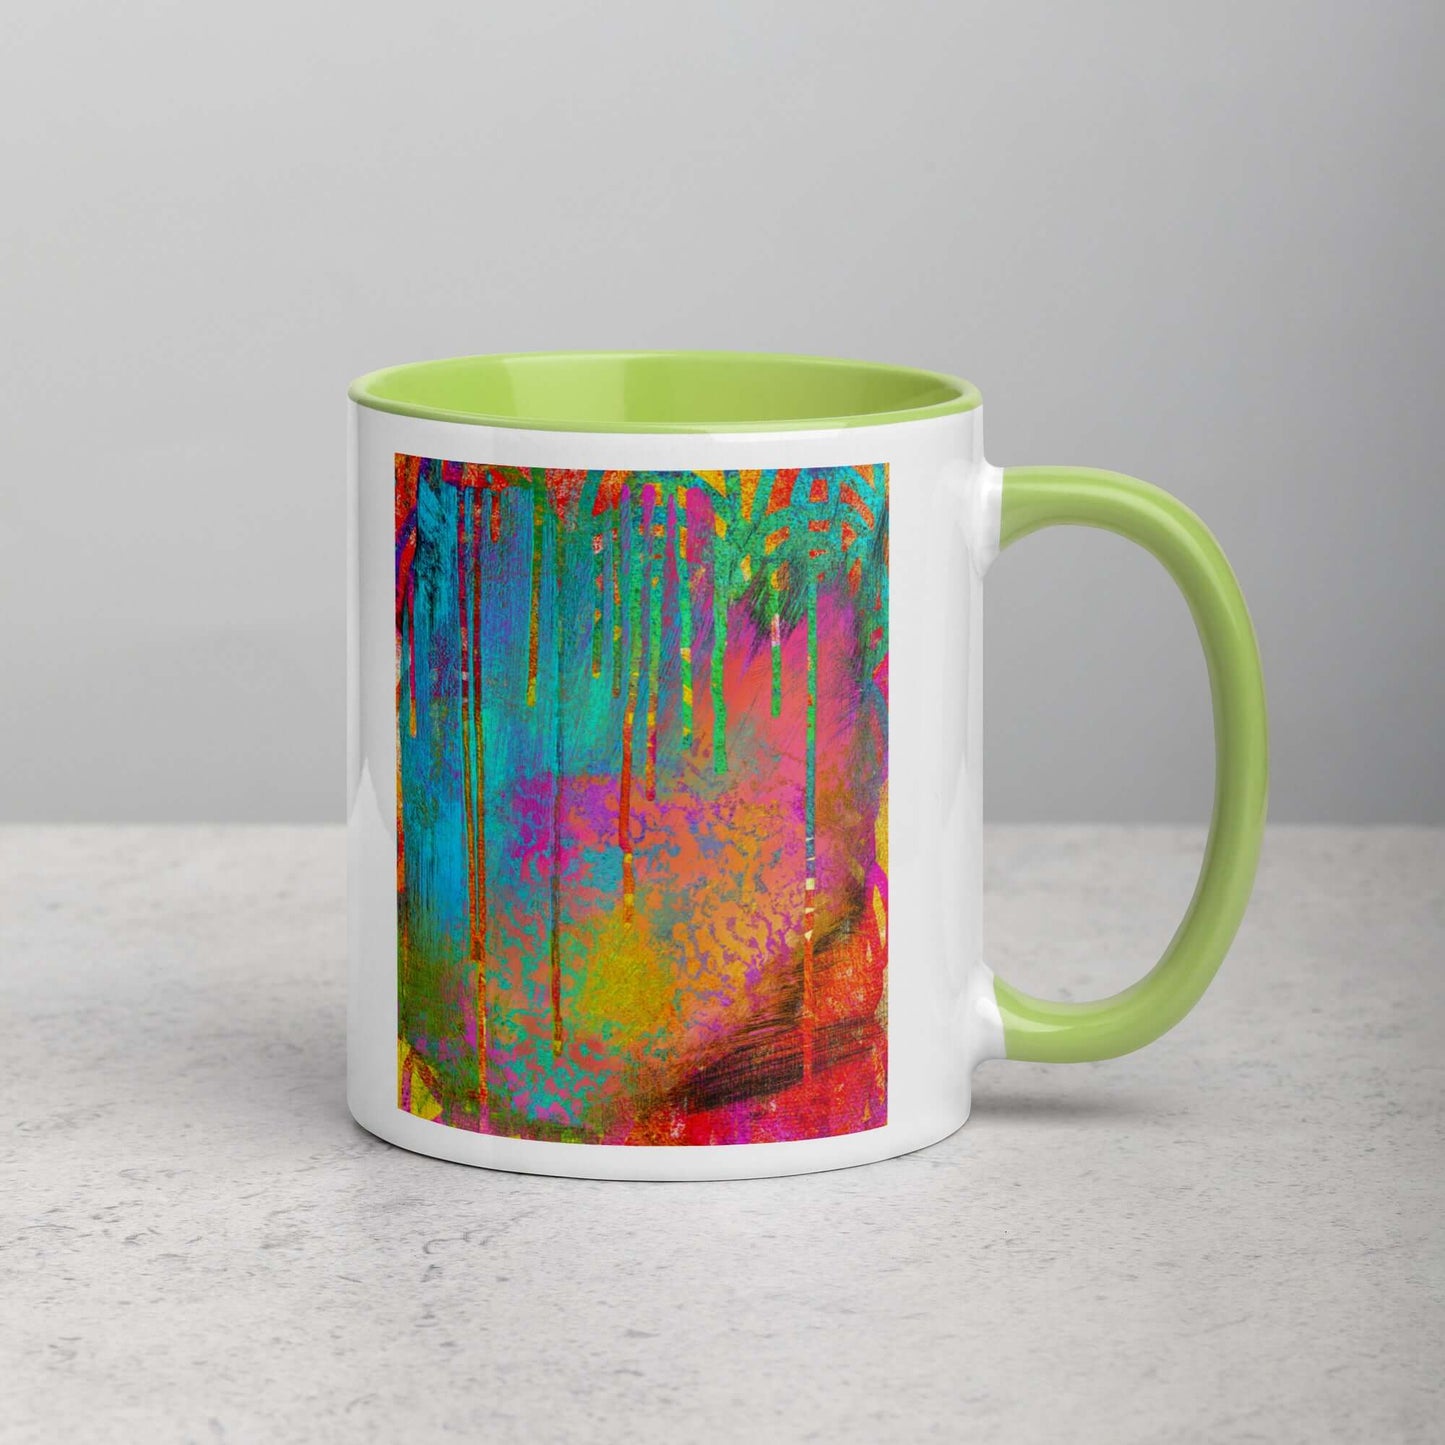 Paint Drips on Colorful Background “Into the Beyond” Abstract Art Mug with Lime Green Color Inside Right Handed Front View